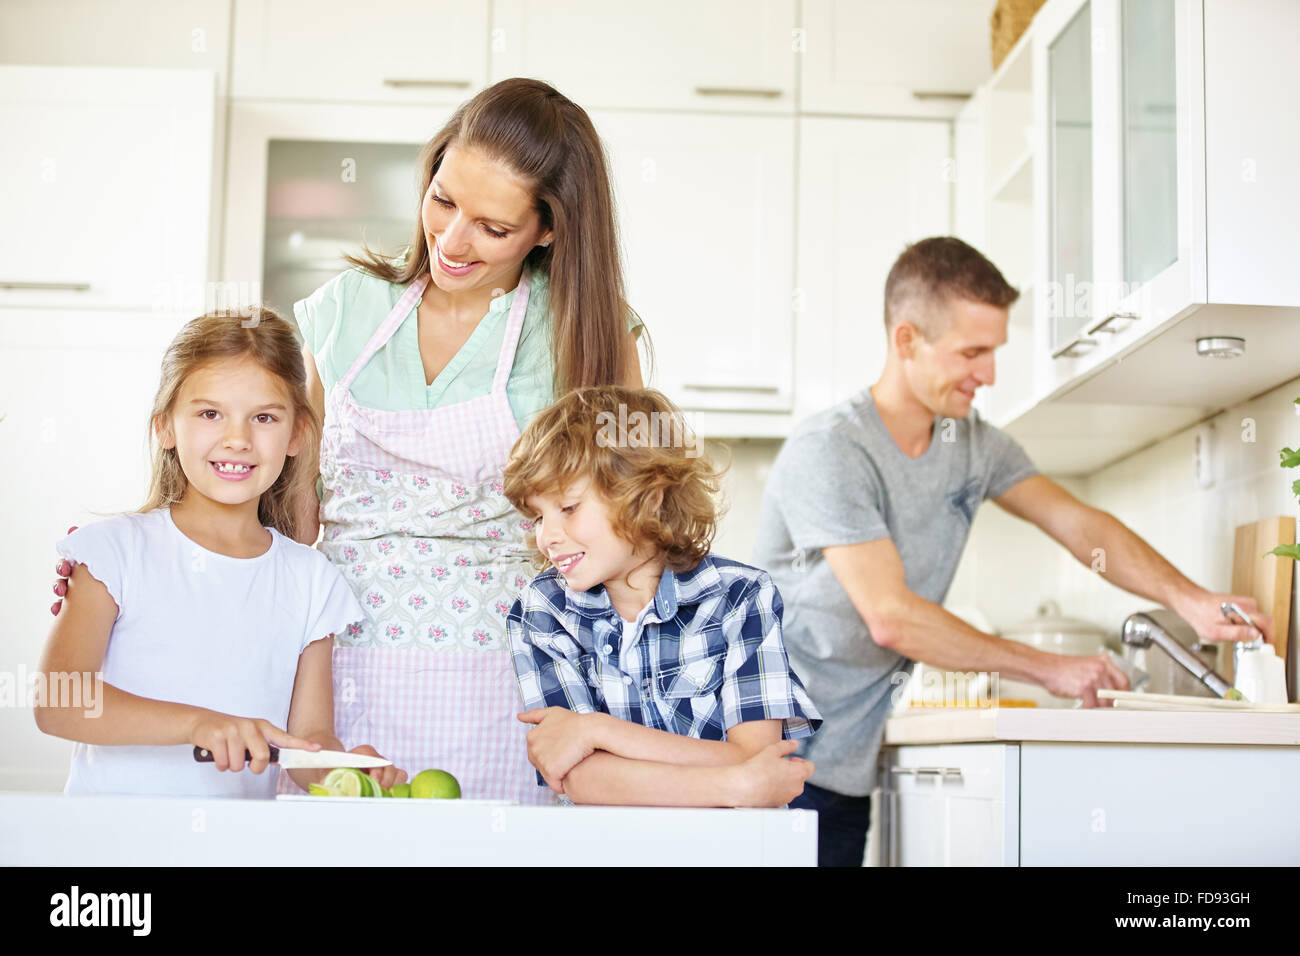 Family with two kids working in kitchen and cutting lime fruits Stock Photo